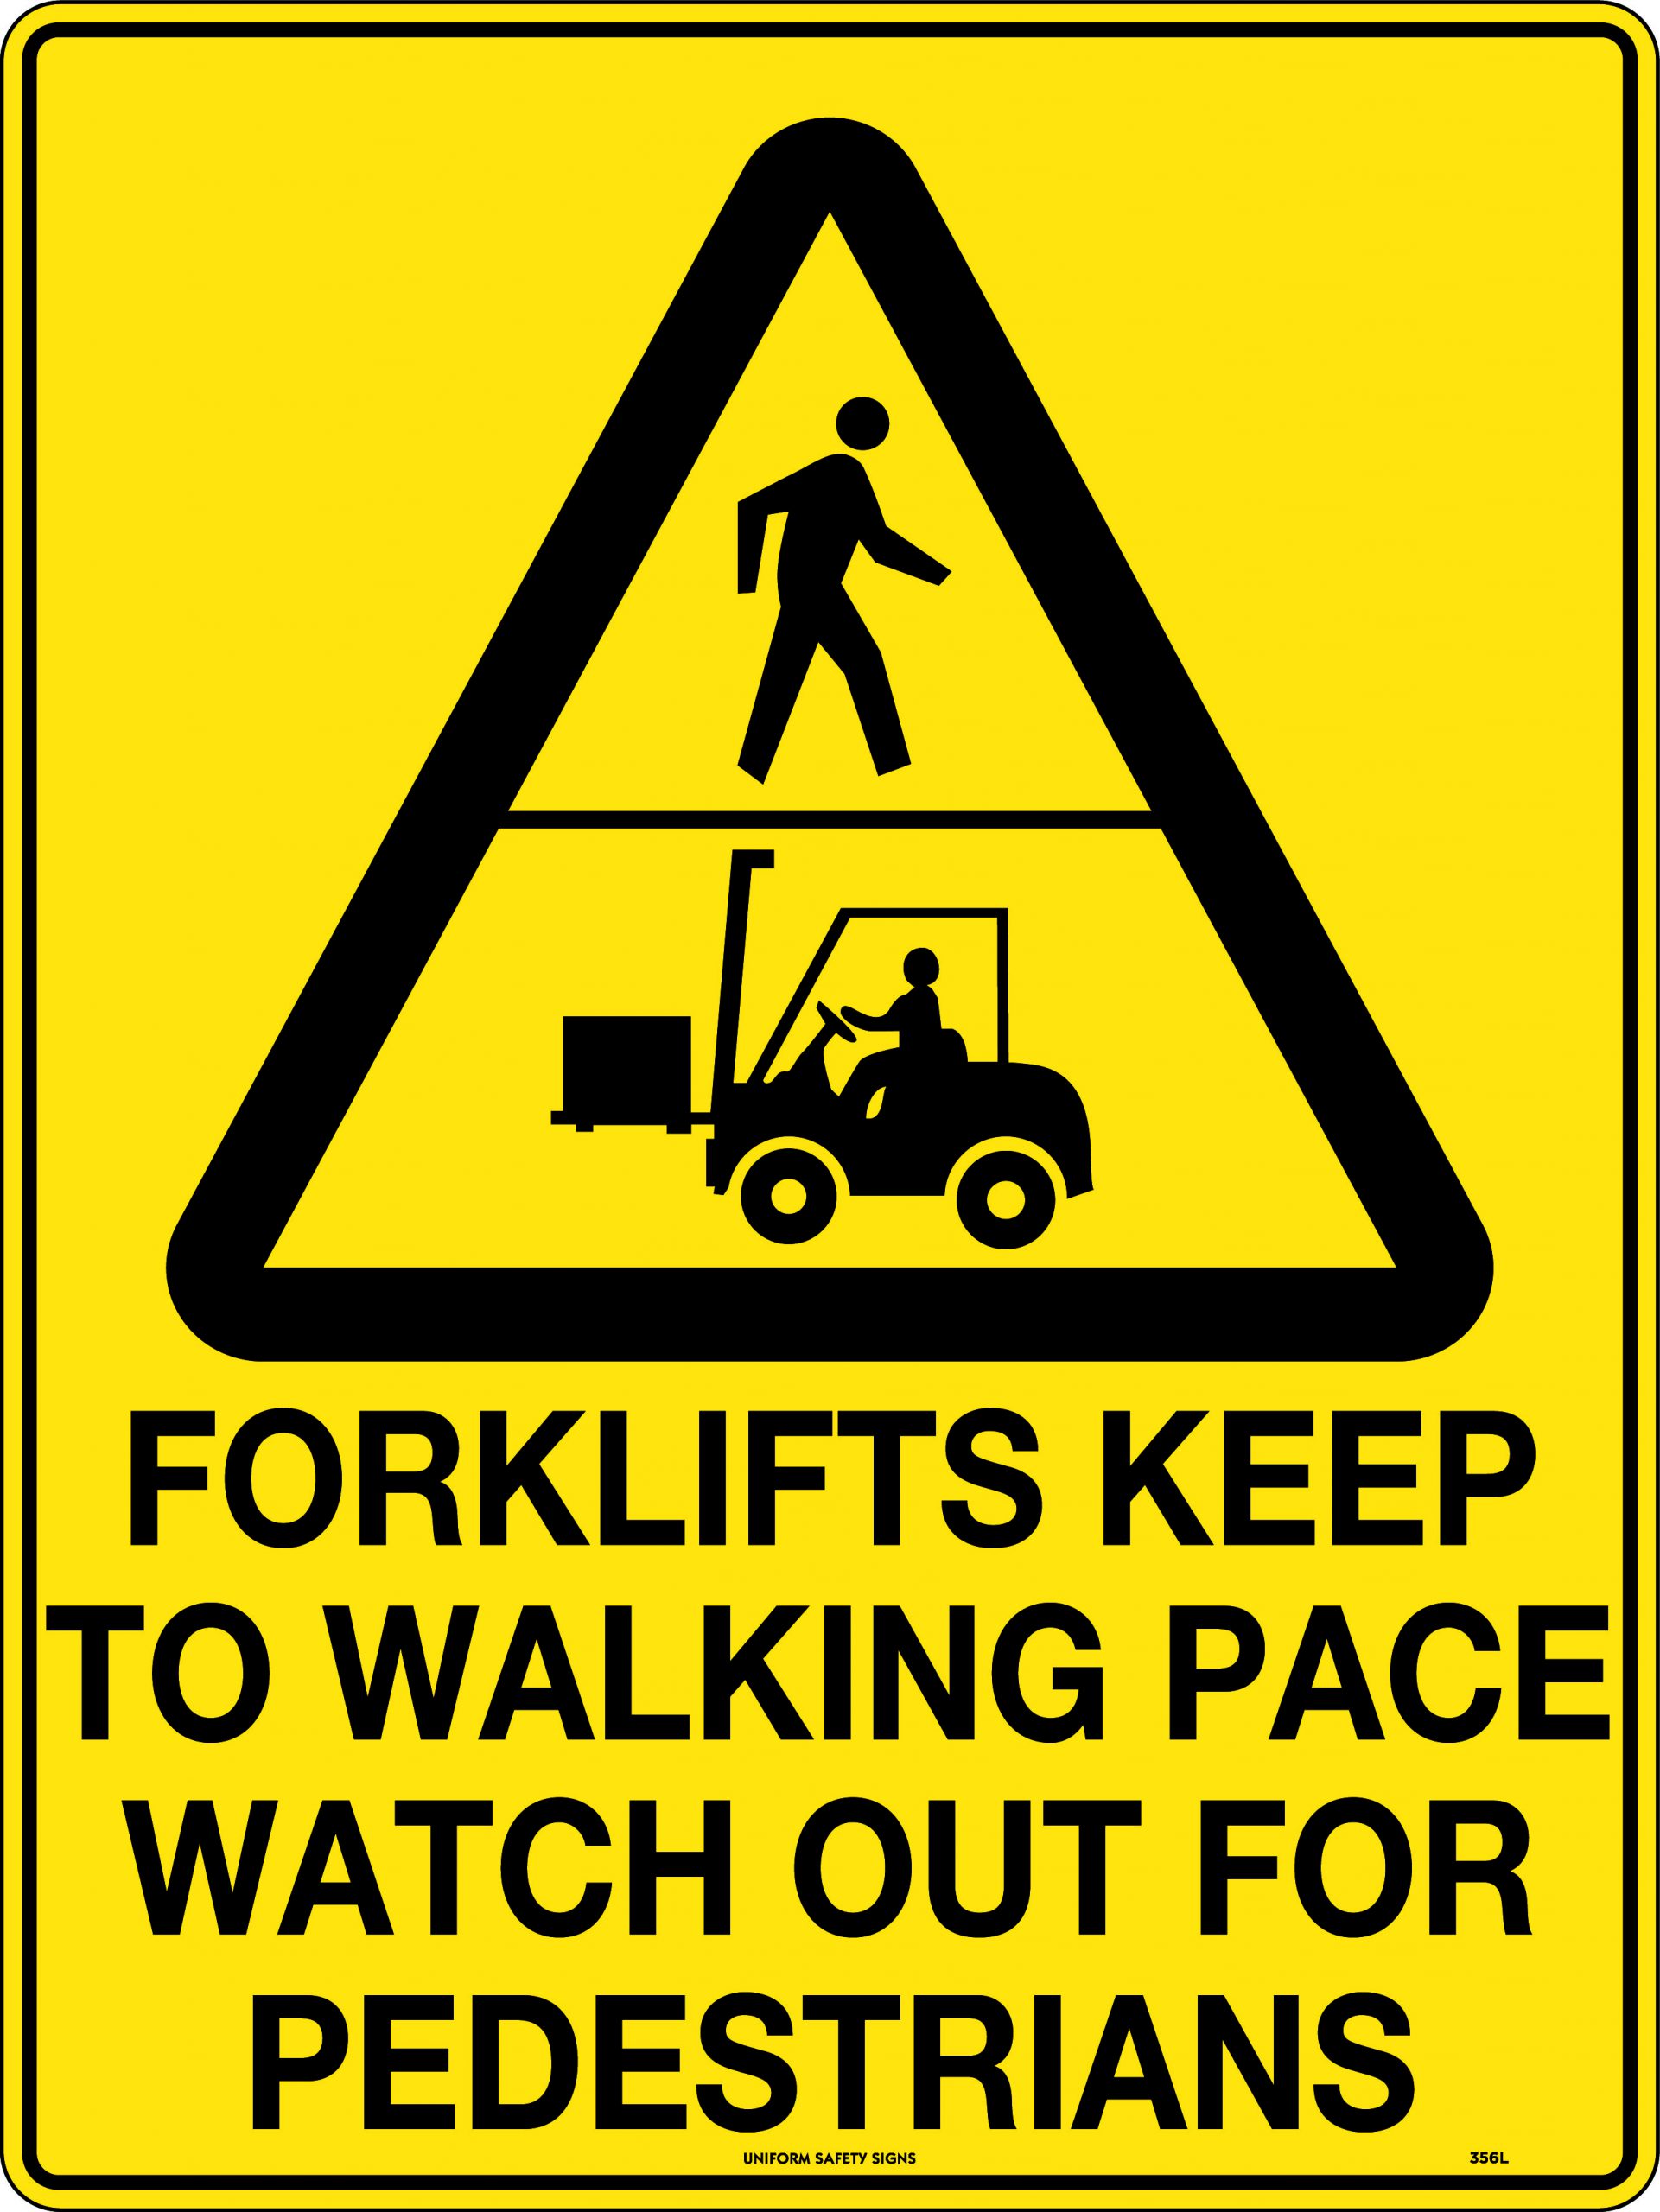 Forklifts Keep to Walking Pace Watch out for Pedestrian Sign